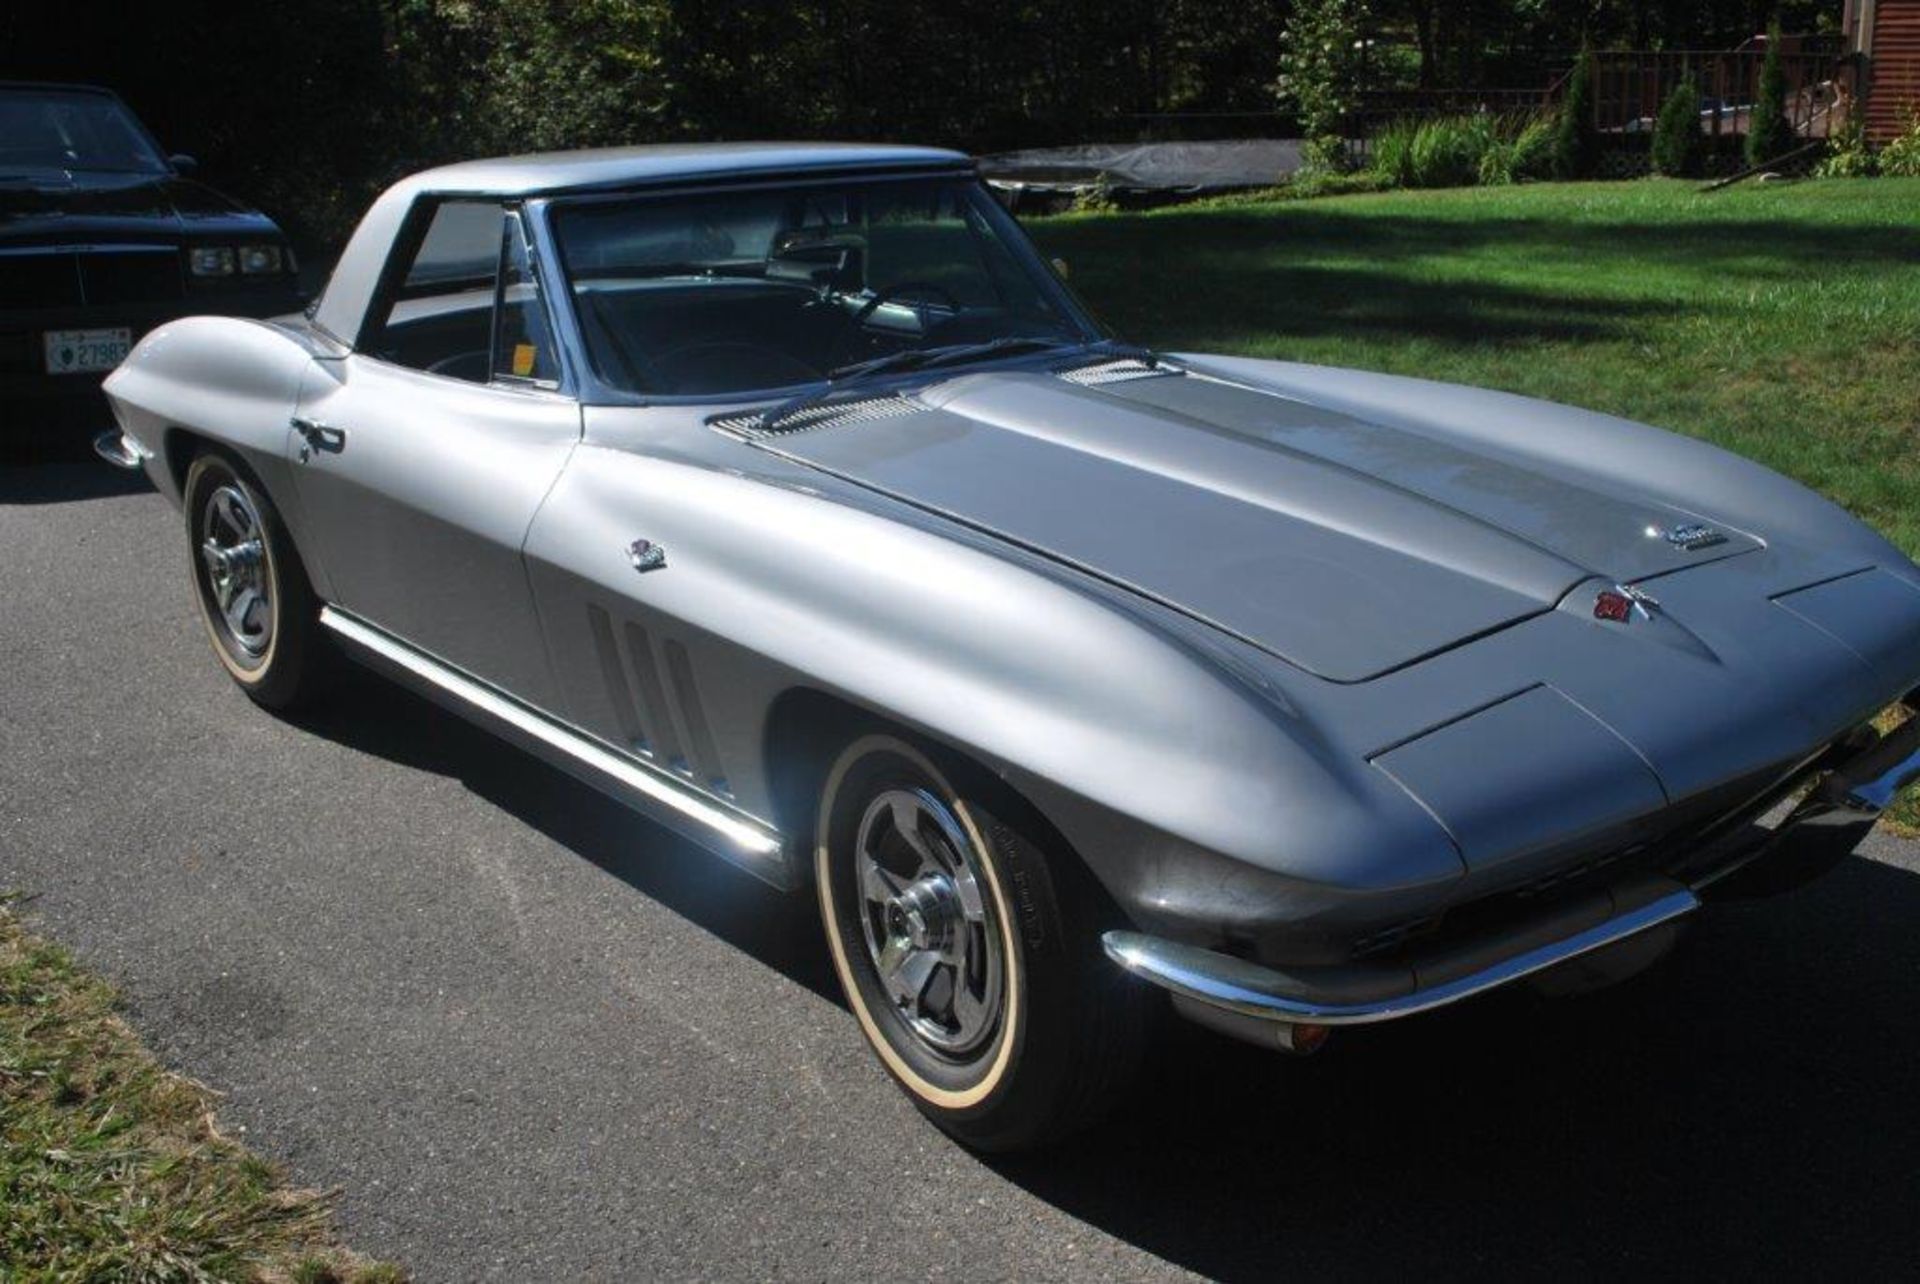 1966 Chevrolet Corvette Convertible Numbers Matching, 327 Cubic Inch, 300 HP, V8 Original Muncie 4 S - Image 2 of 15